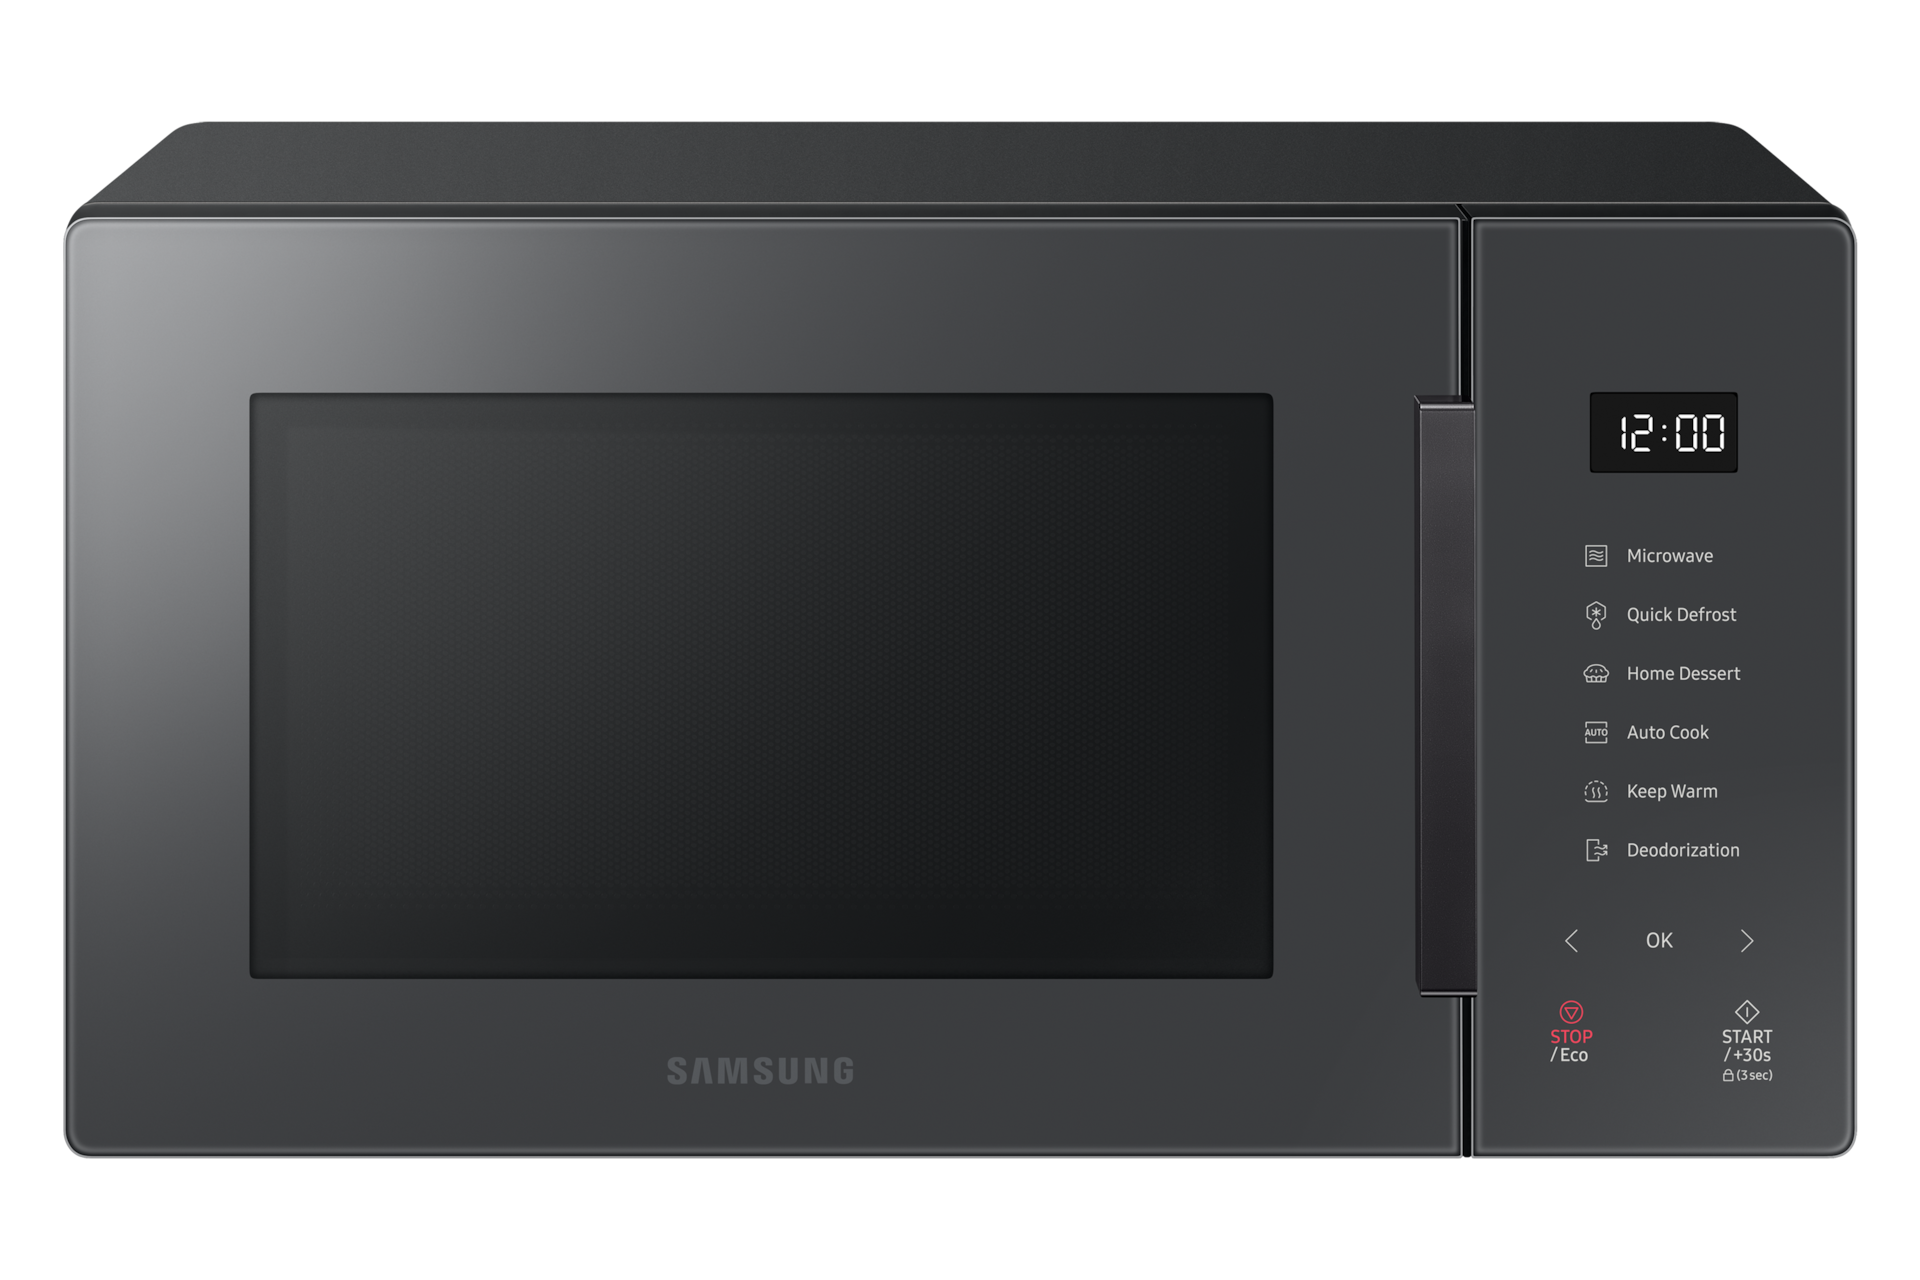 SAMSUNG Glass Front 23 Litre Solo Microwave Oven